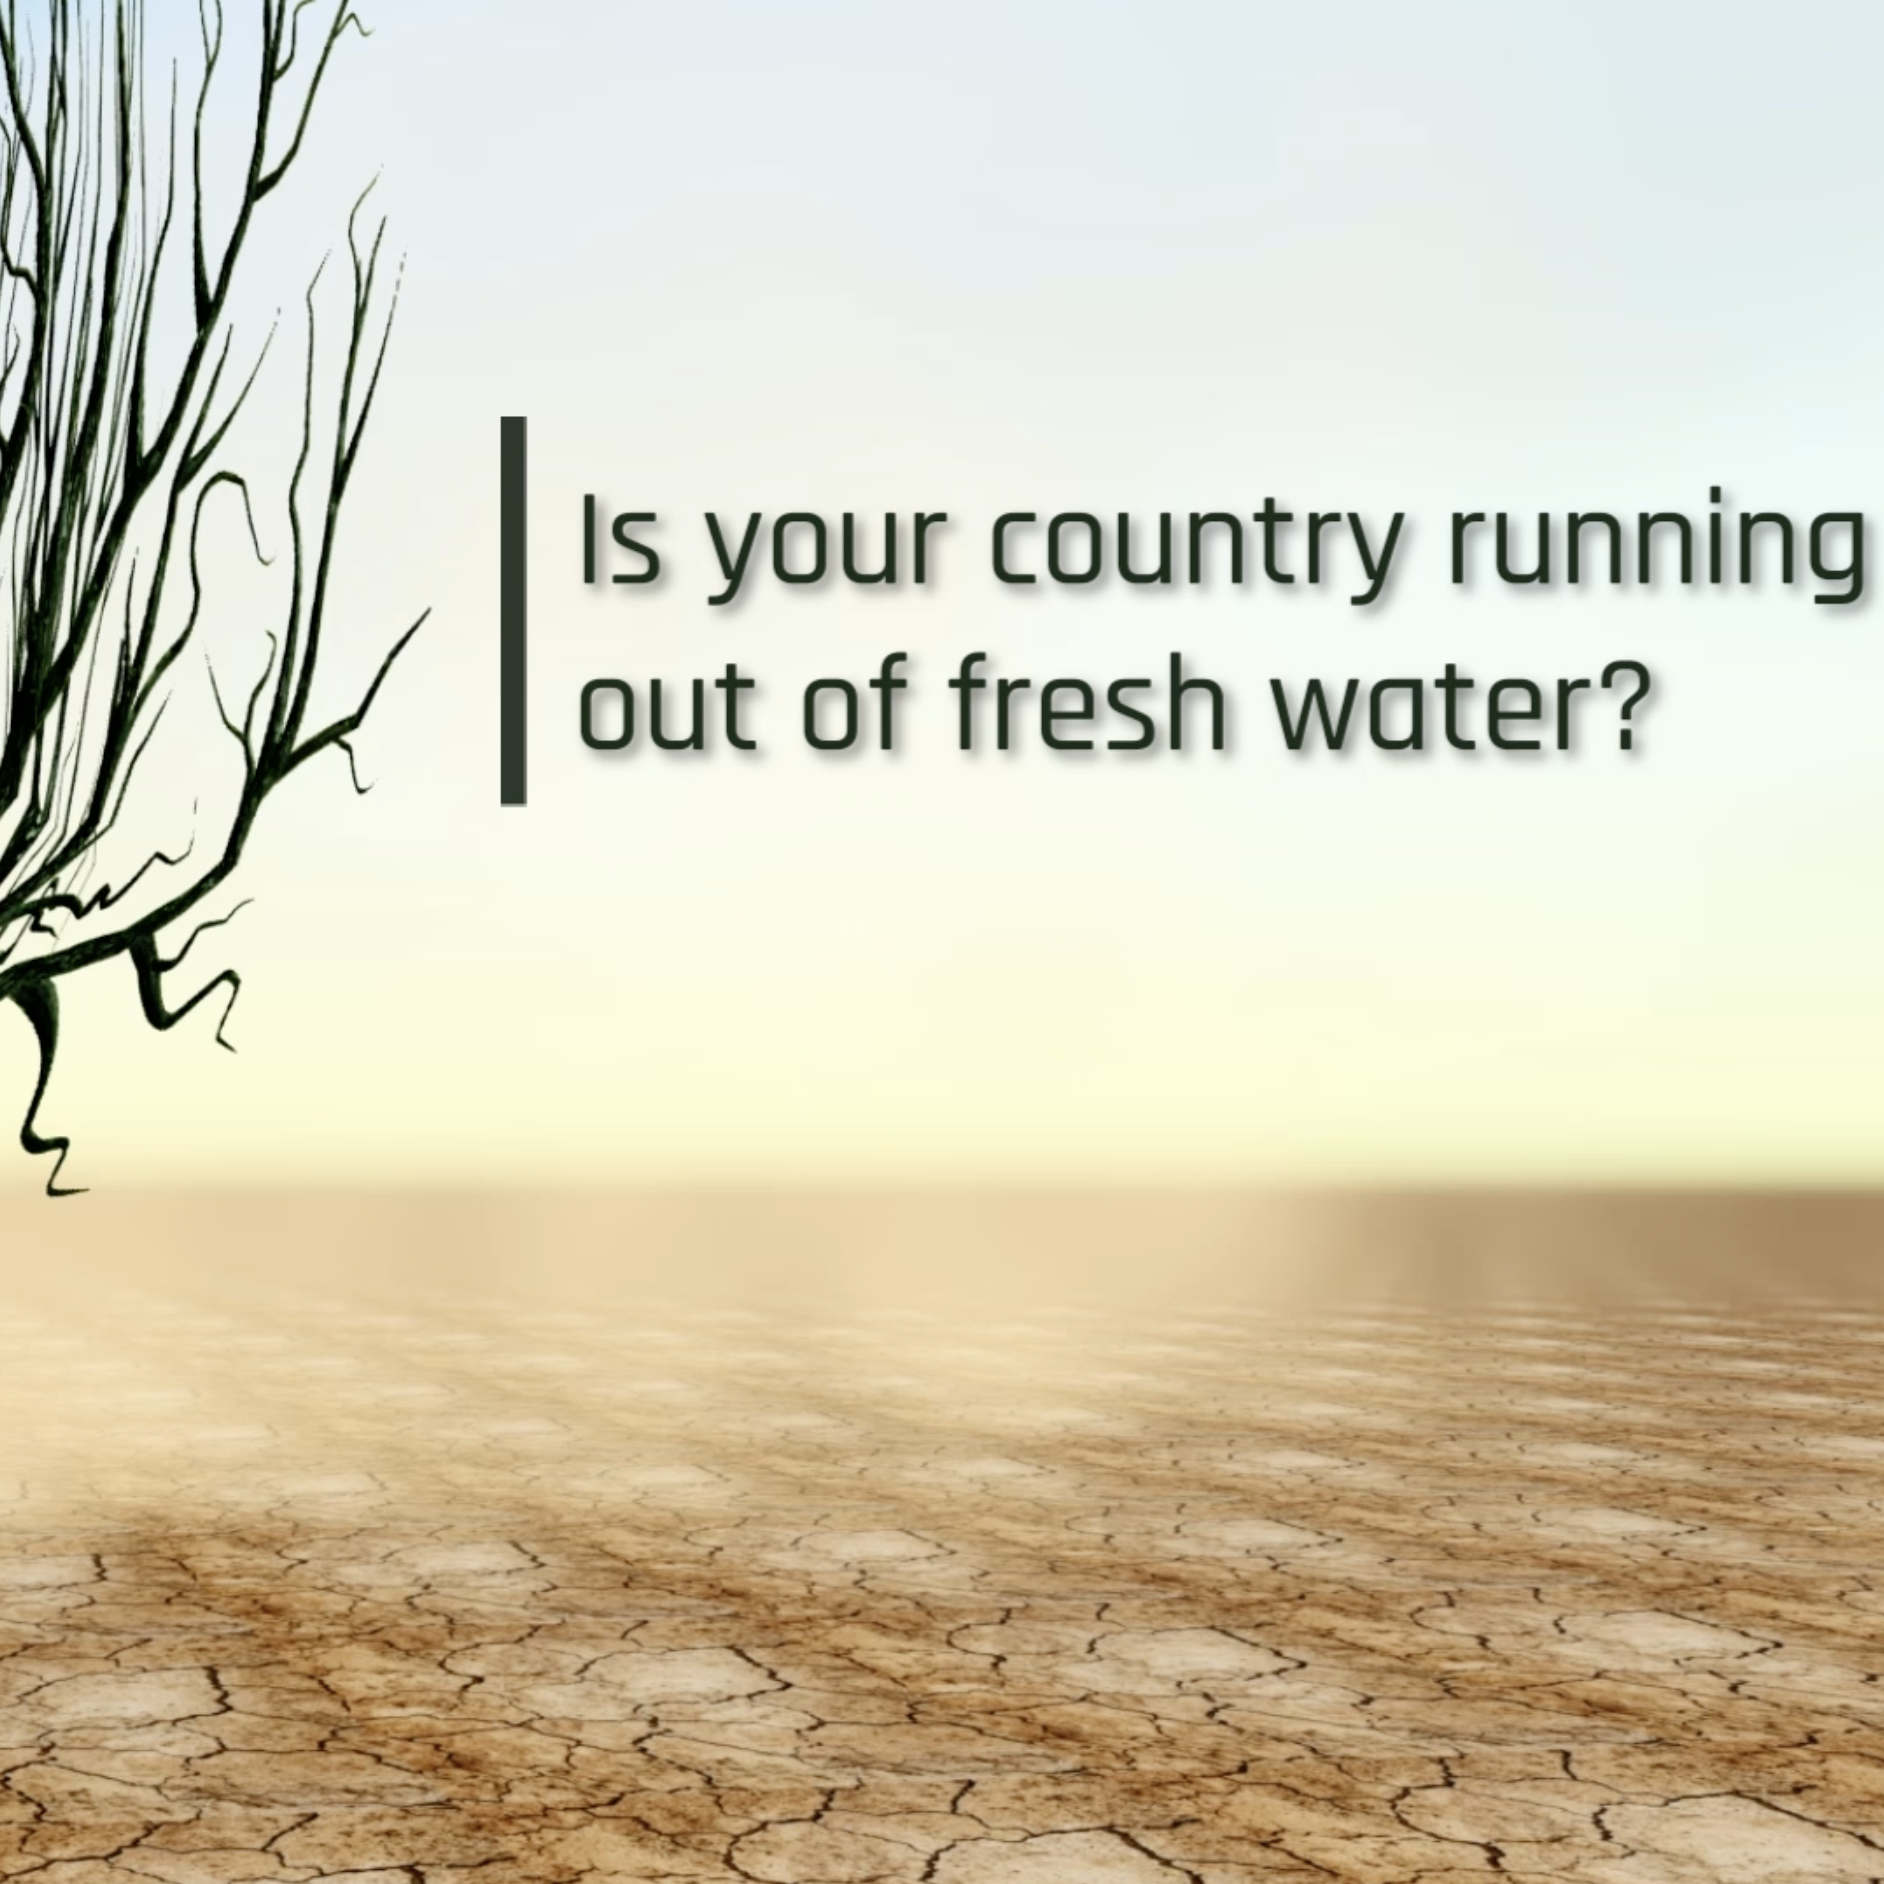 Is your country running out of fresh water?